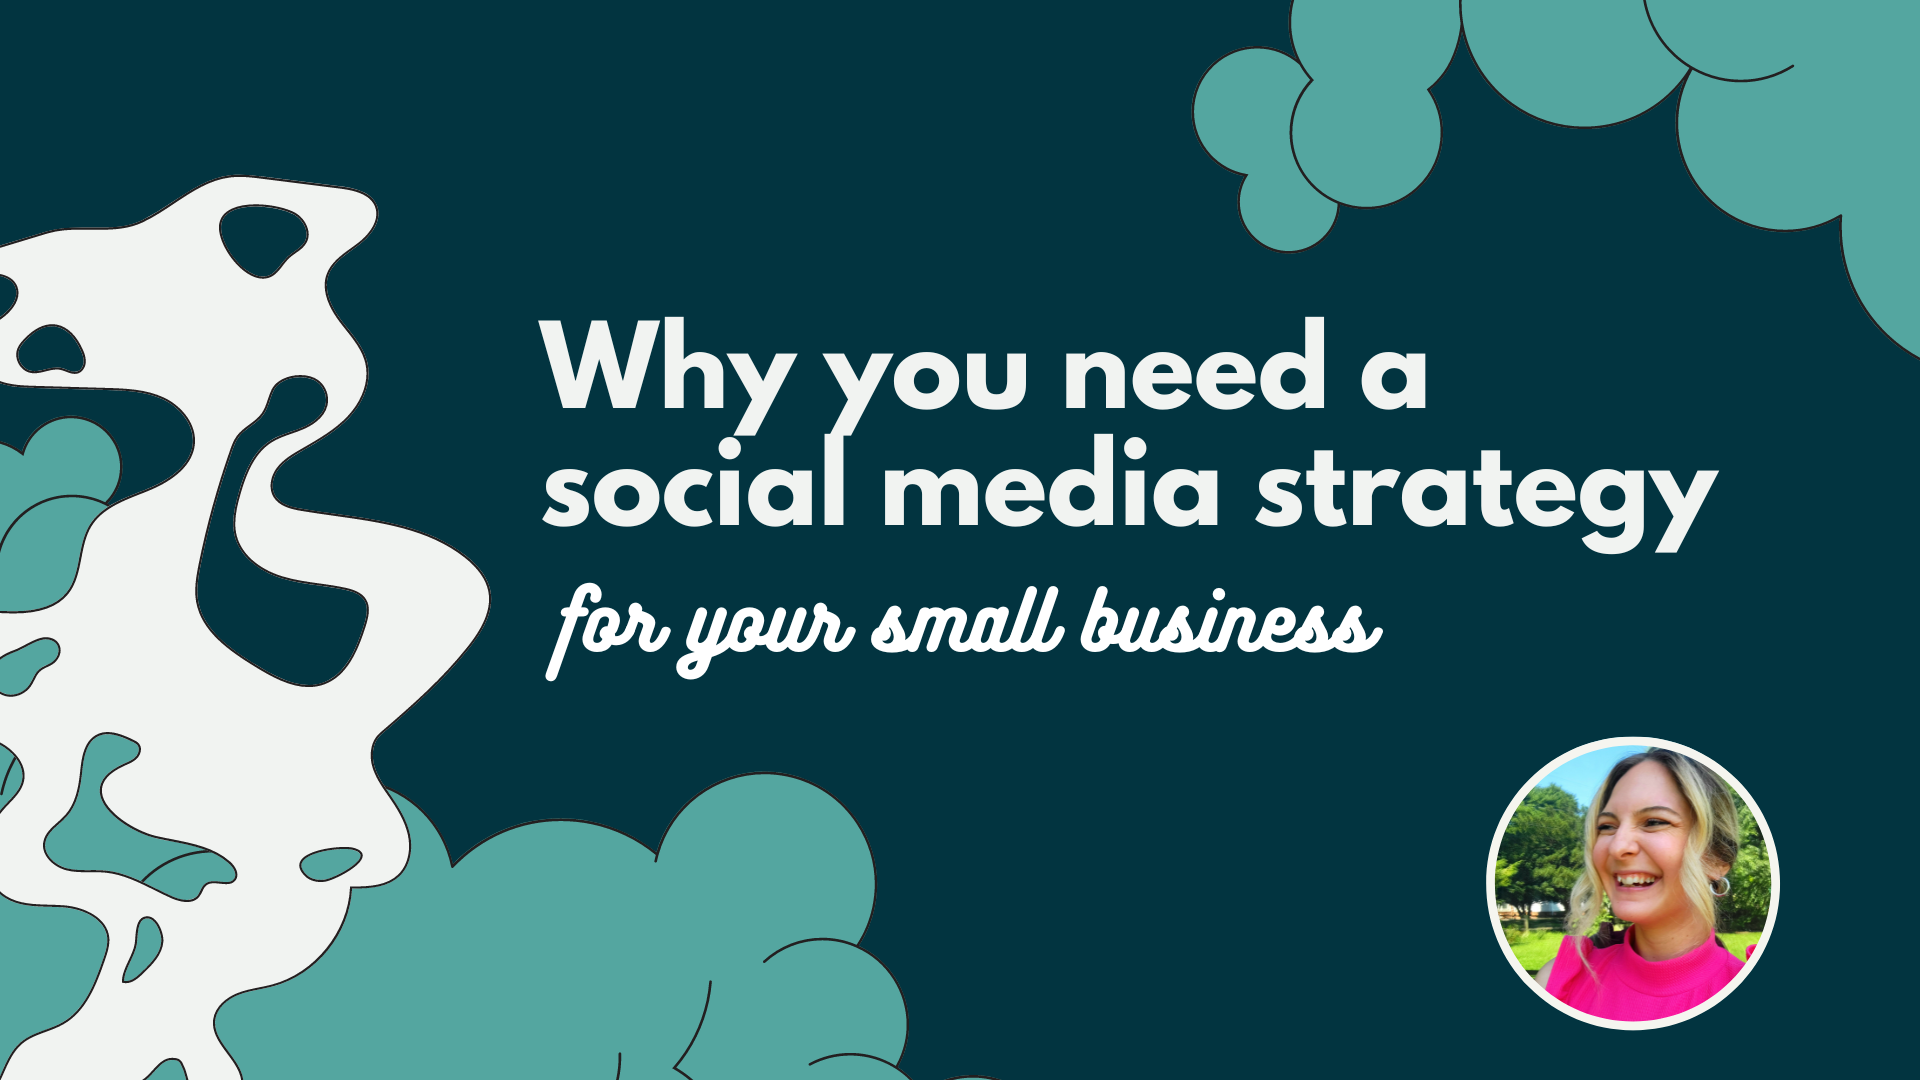 Why your small business needs a social media strategy